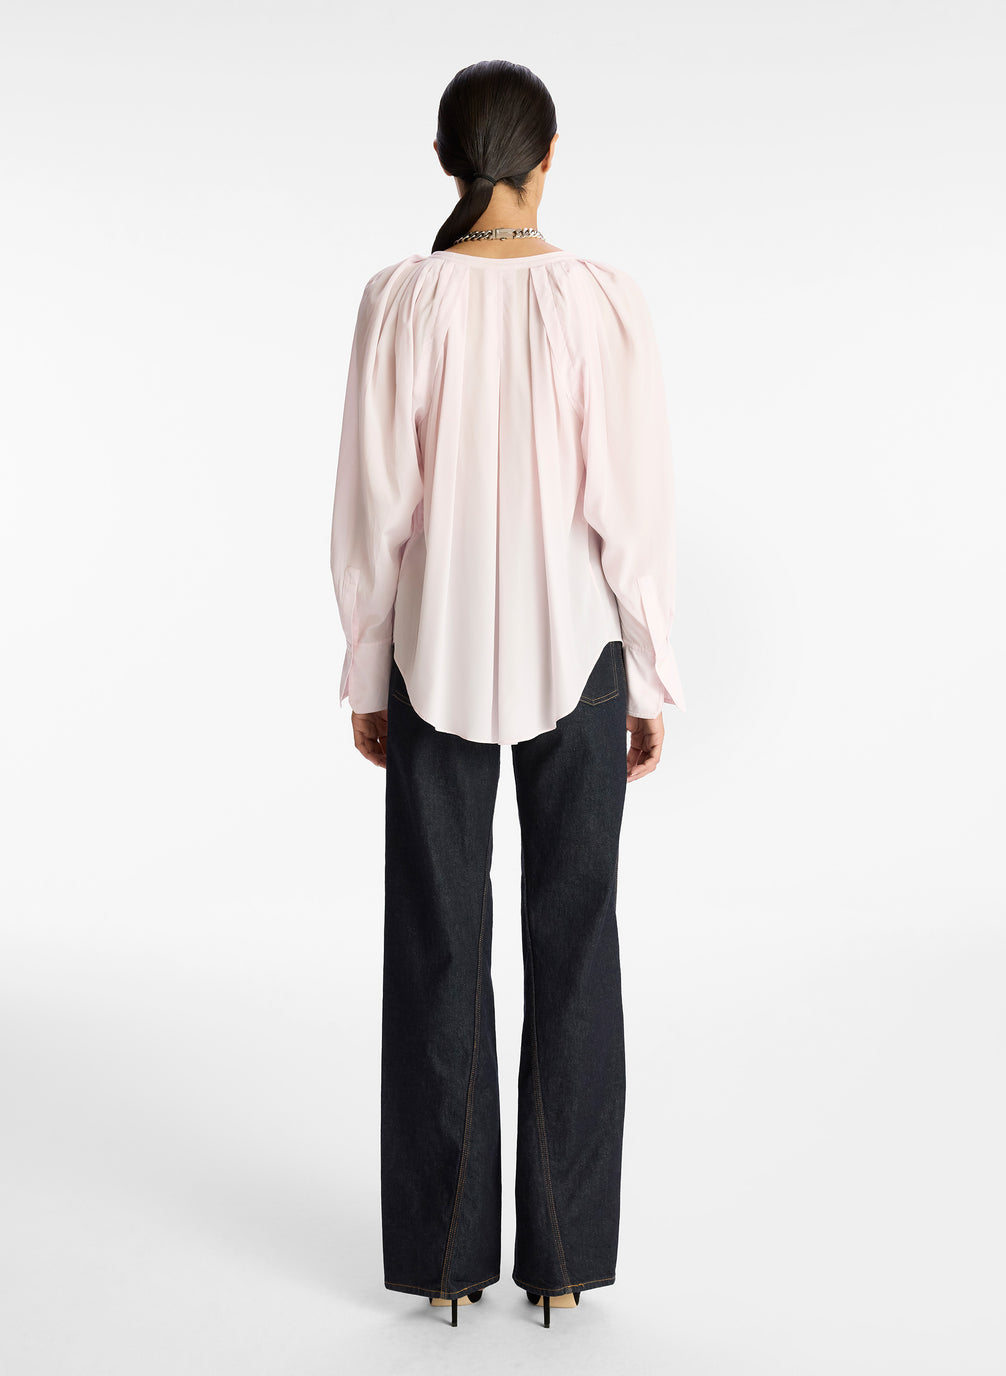 back view of woman wearing light pink v neck long sleeve silk top and dark wash denim jeans